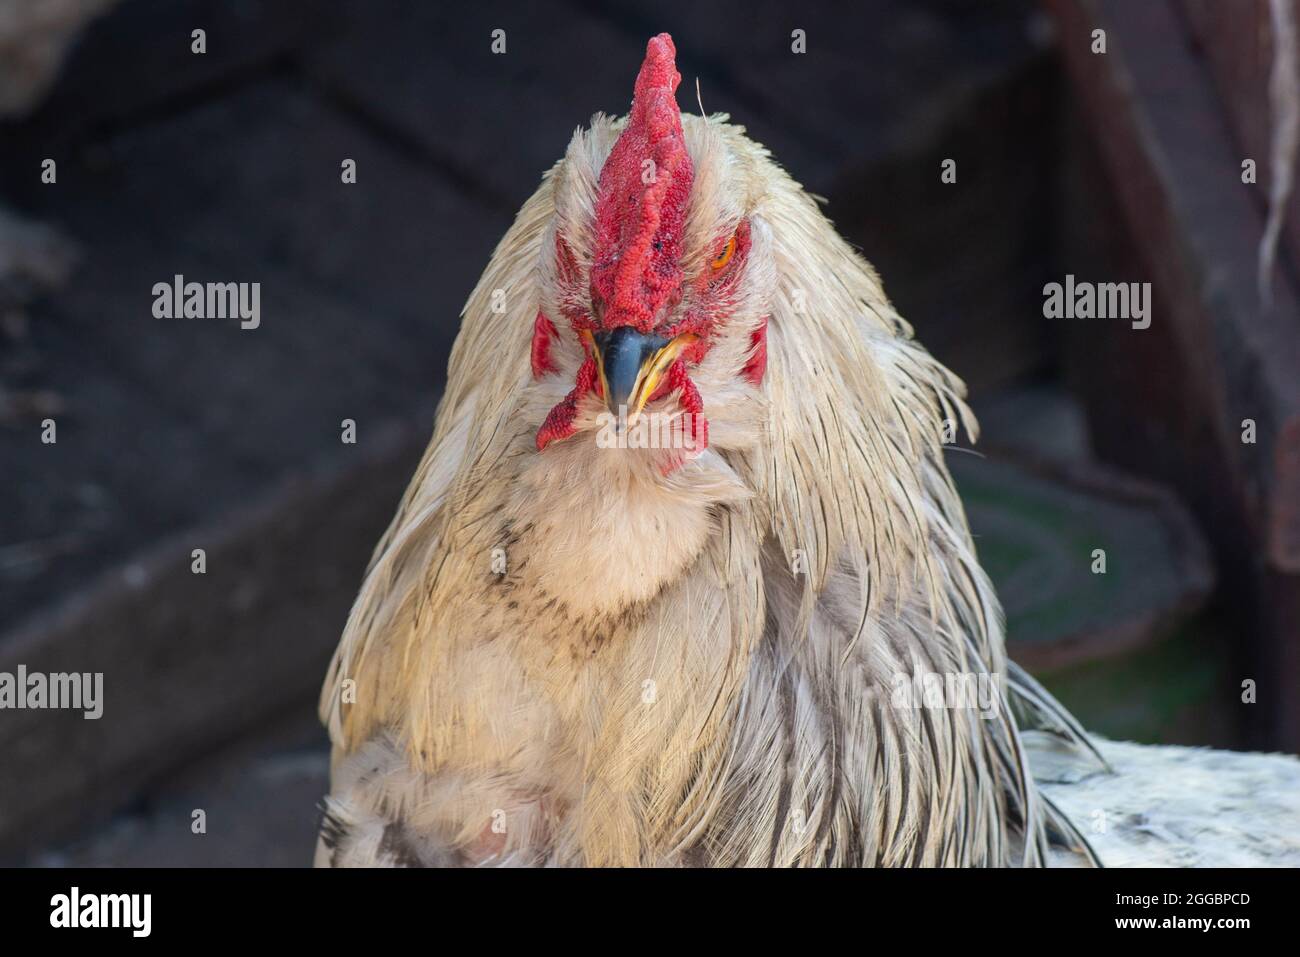 portrait of a white vocal fighting rooster Stock Photo